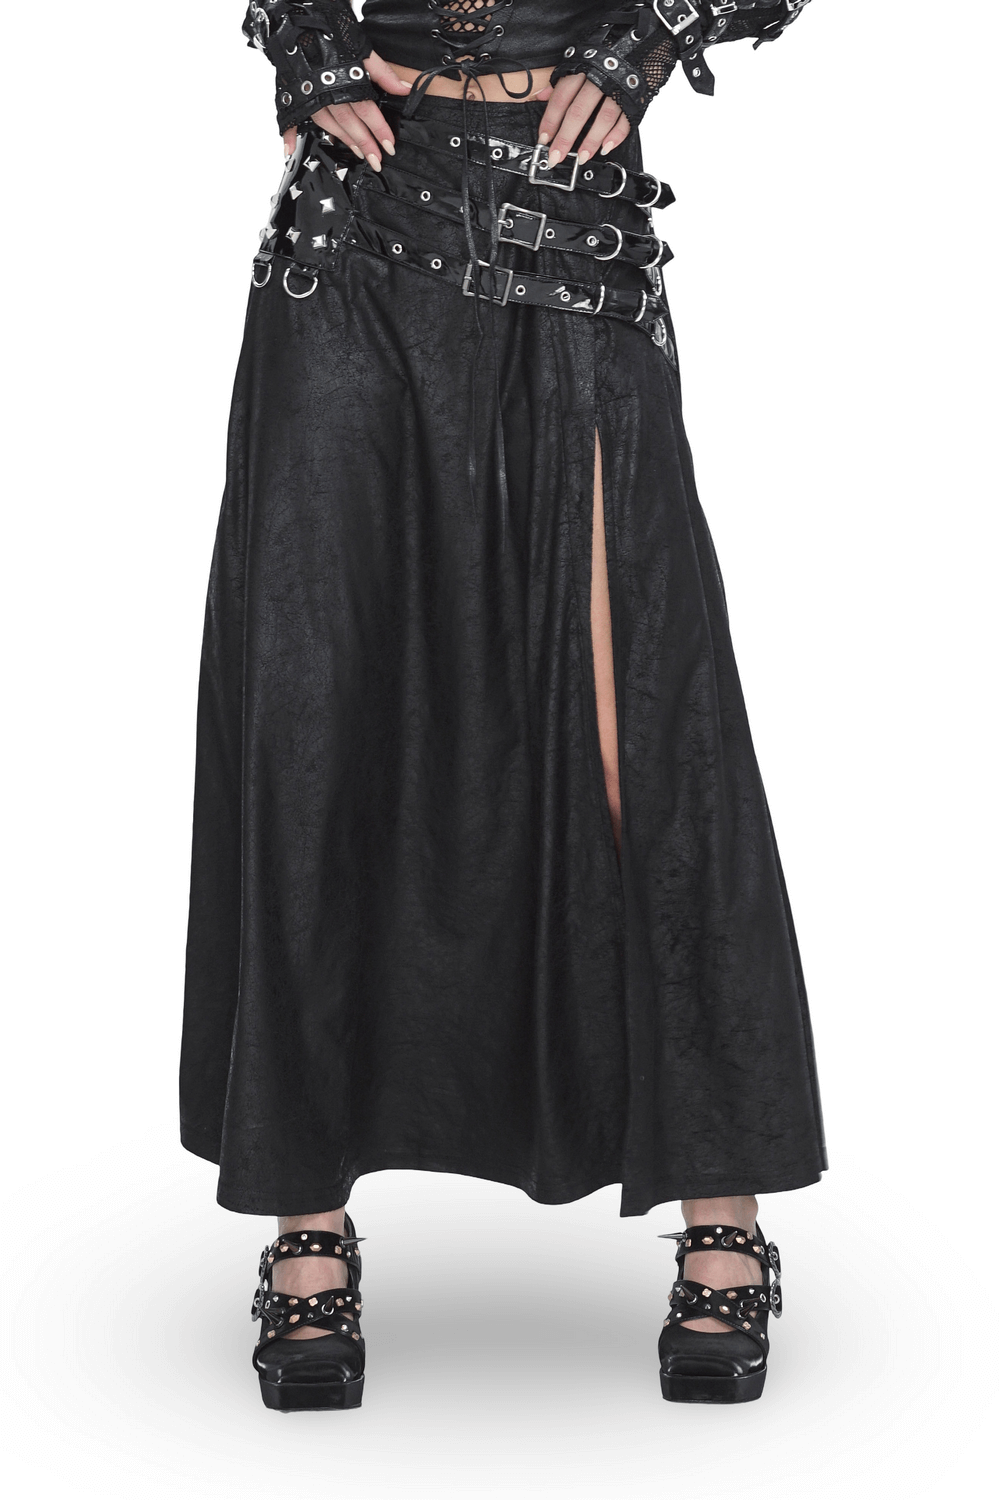 Chic Black Faux Leather Buckled Long Skirt With Slit